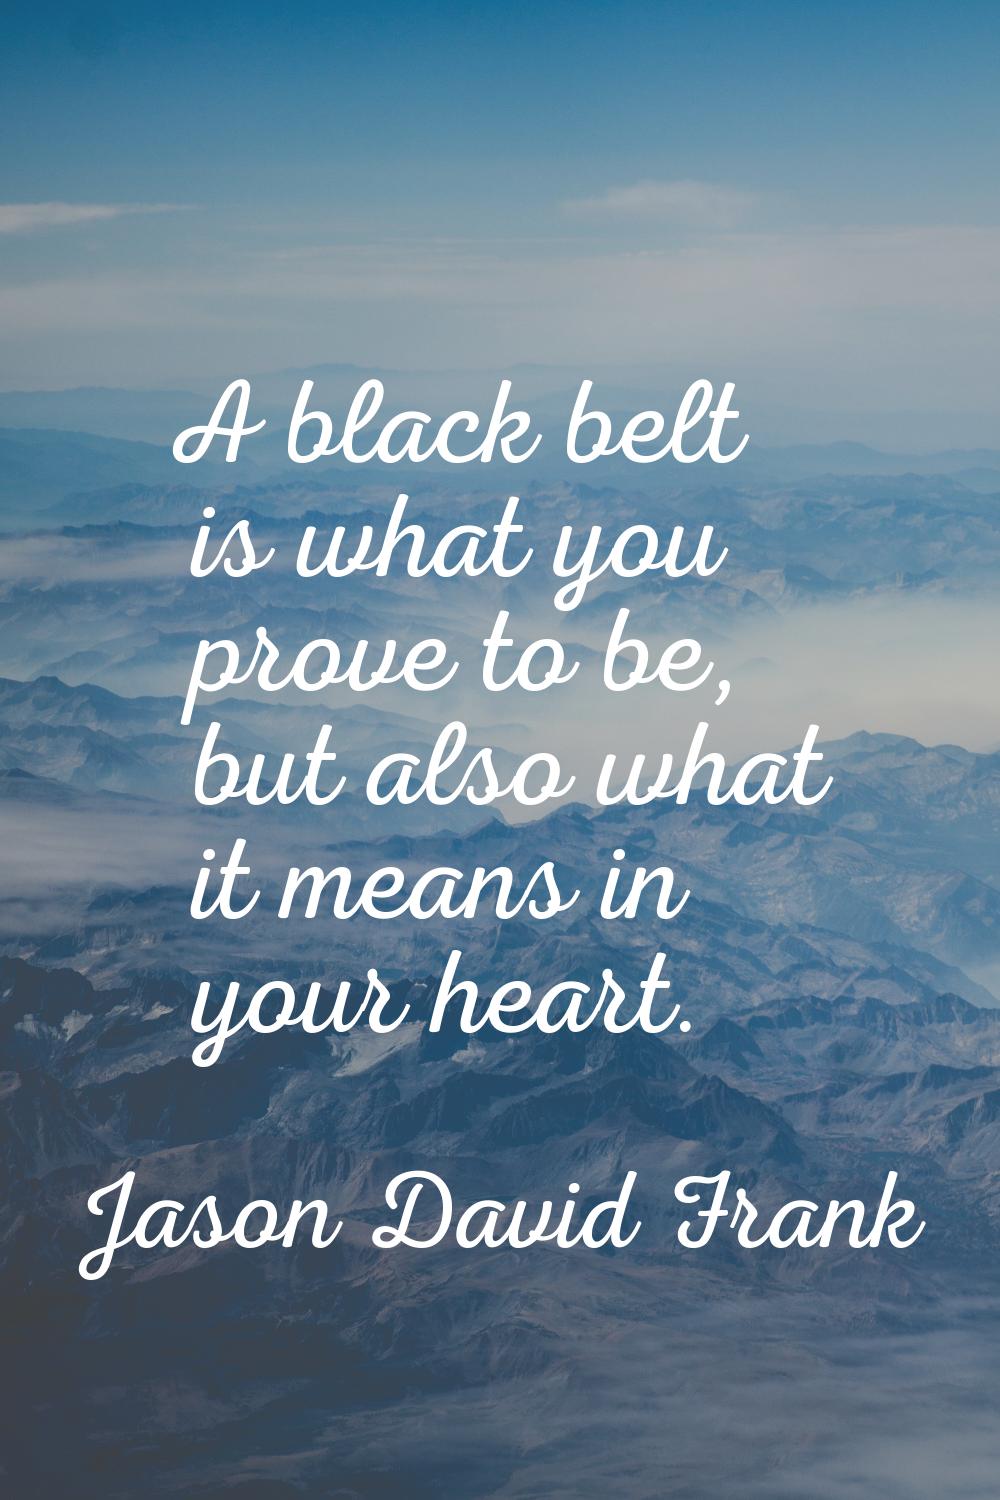 A black belt is what you prove to be, but also what it means in your heart.